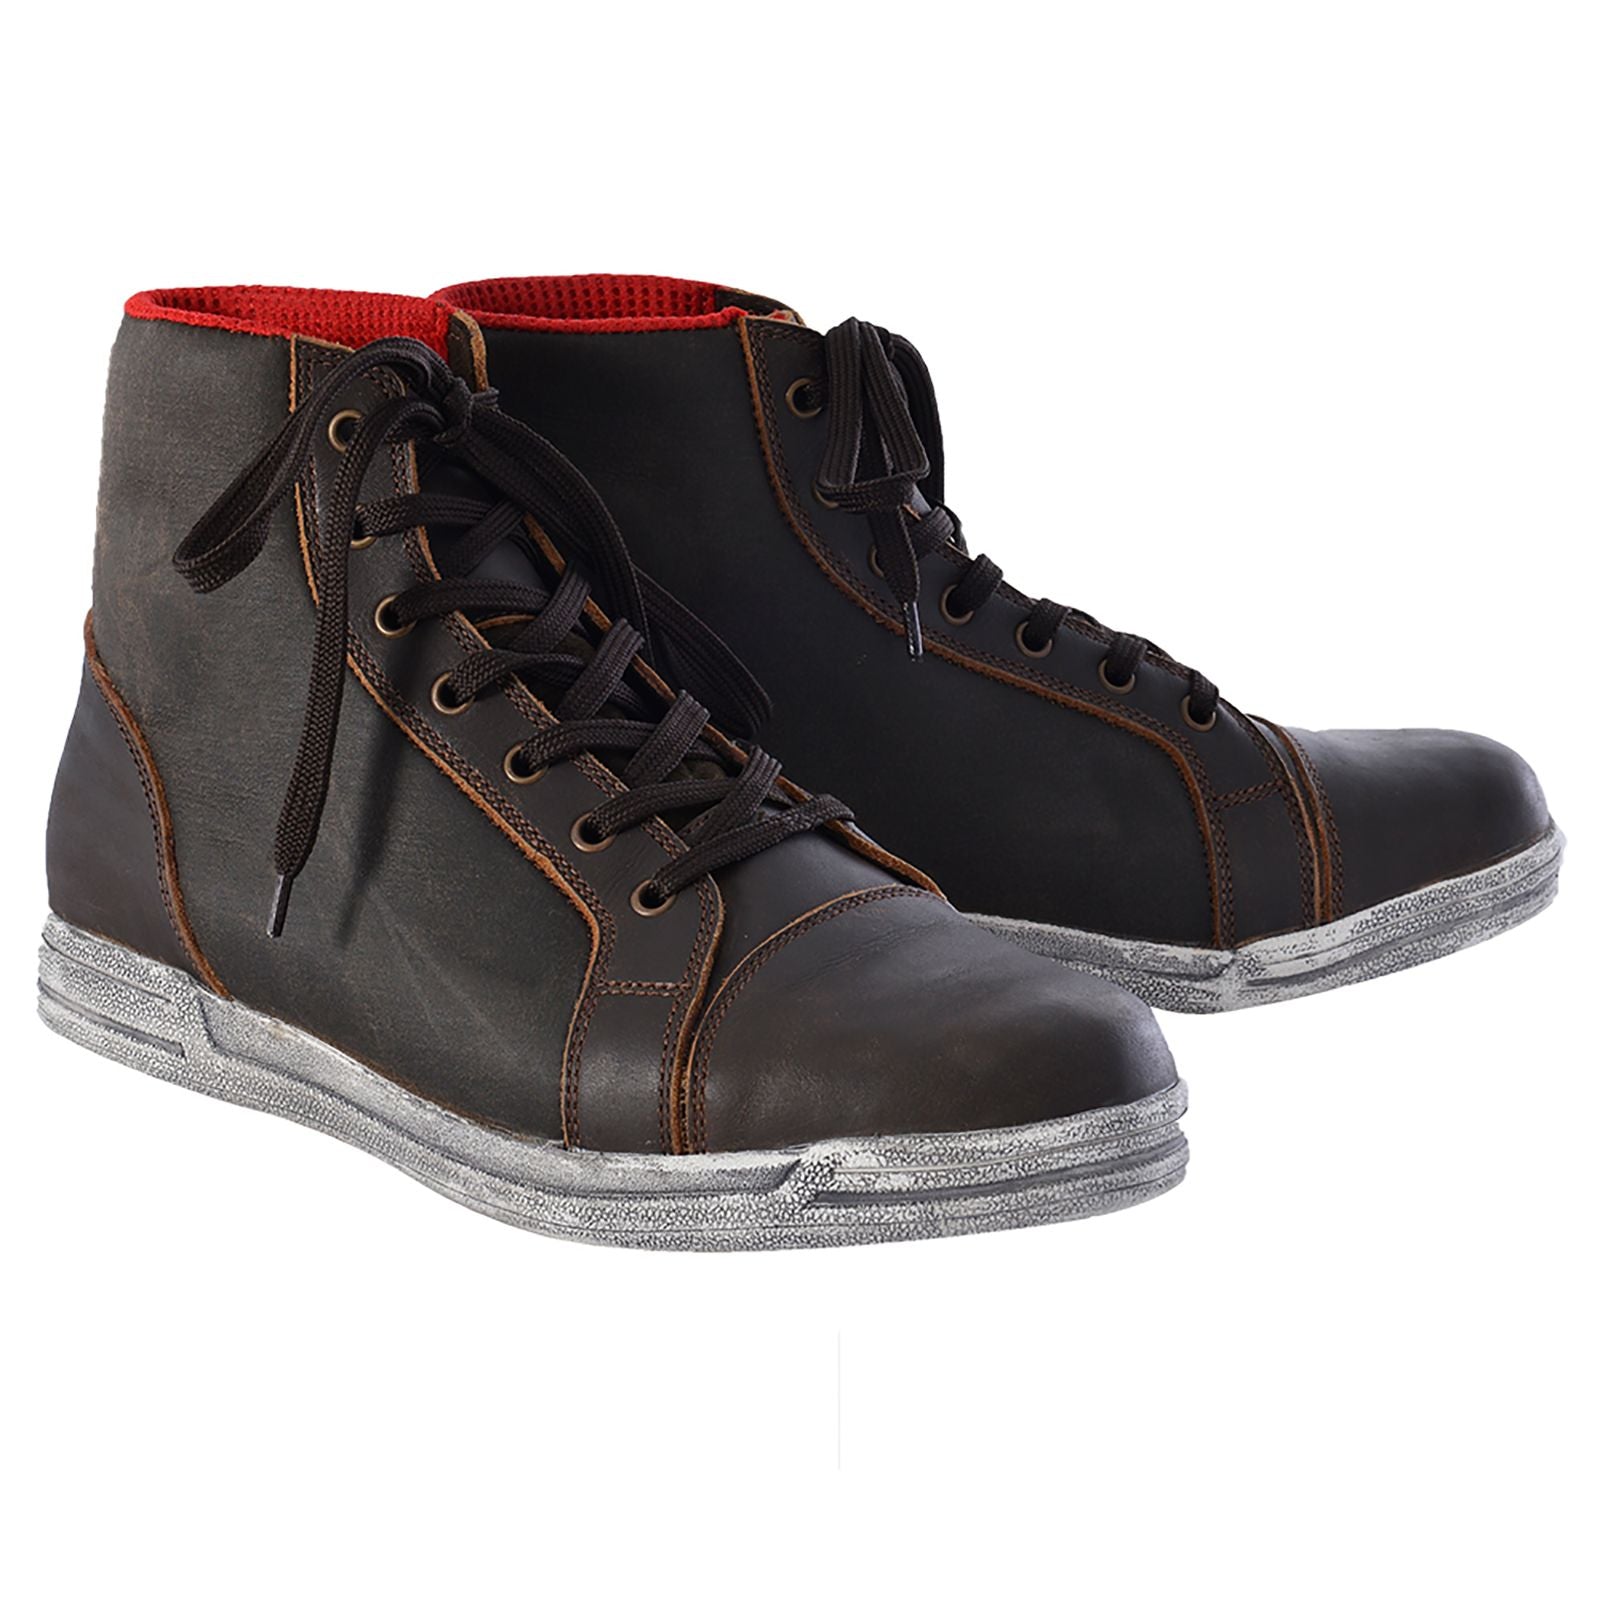 New OXFORD Jericho Mens Boots Brown UK 11 (Euro 45) #OXBM11145